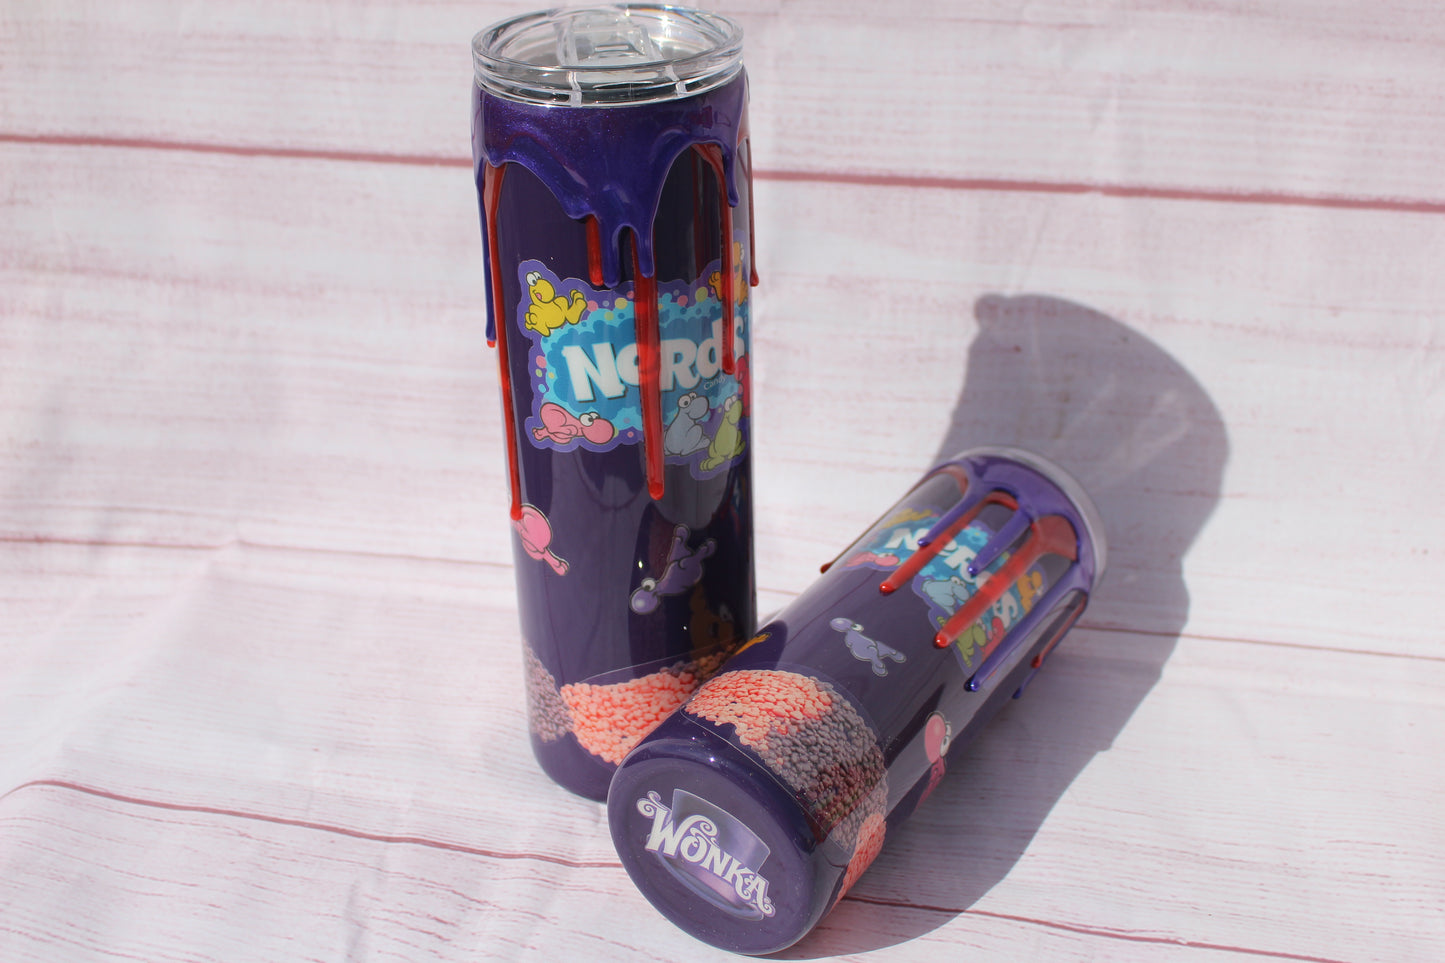 Nerds 3D Drip Tumbler, Custom Stainless Steel Cup, Favorite Candy Tumbler, Nerds Gift, Nerds Candy 3D Cup, Drip Cup